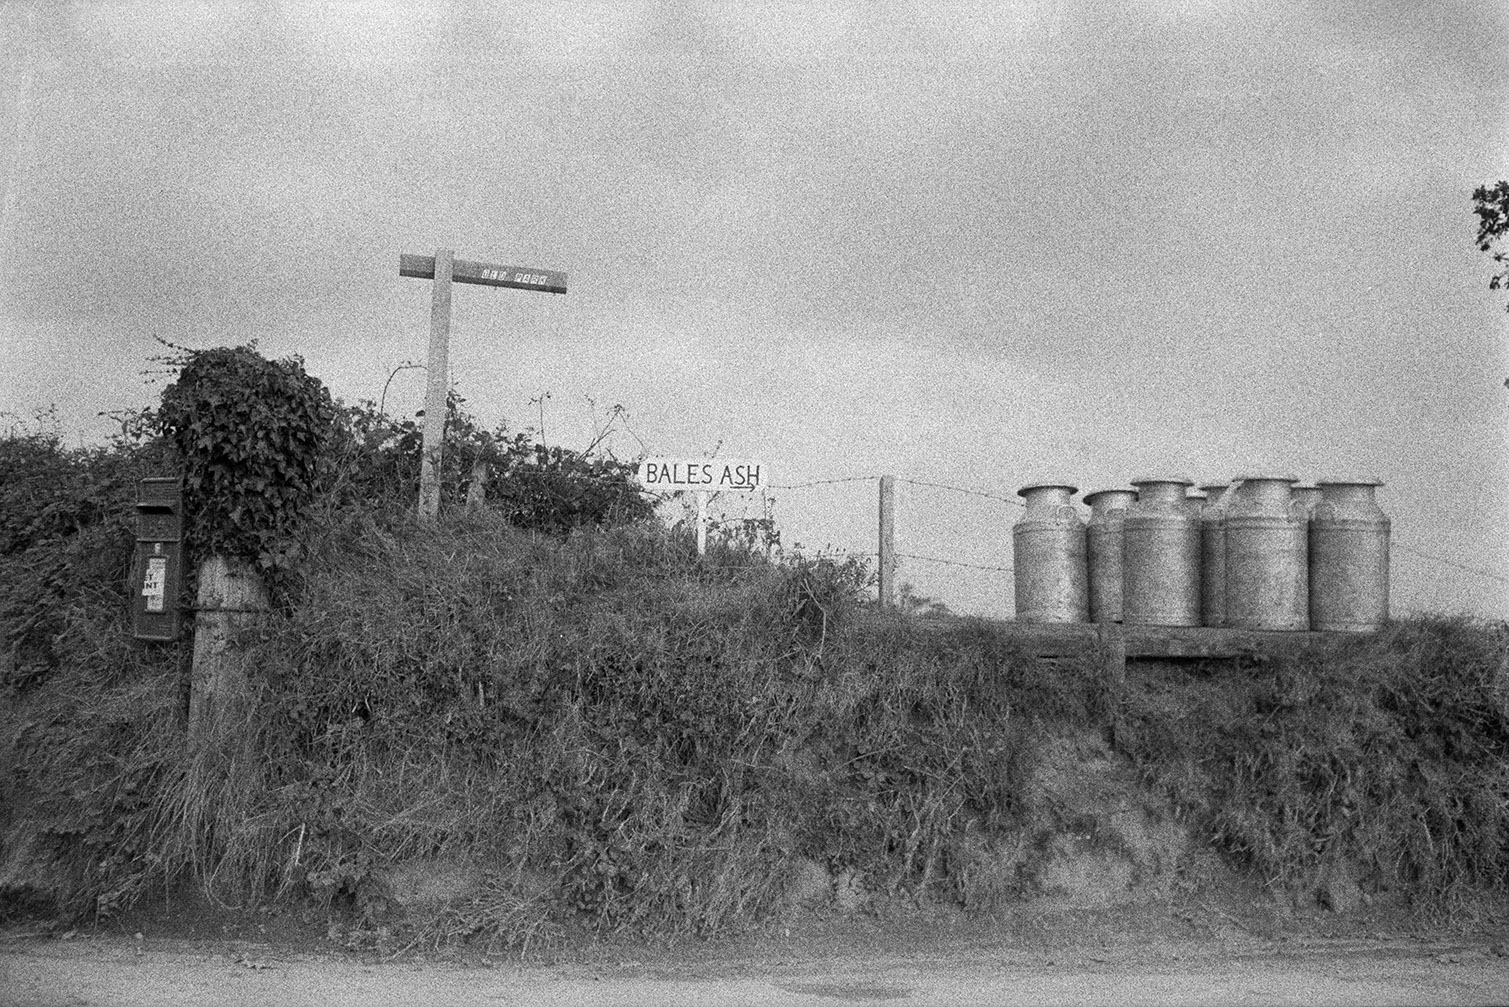 Milk churns on a milk churn stand in a hedge, by a post box and signpost for 'Bales Ash' farm, at Atherington.